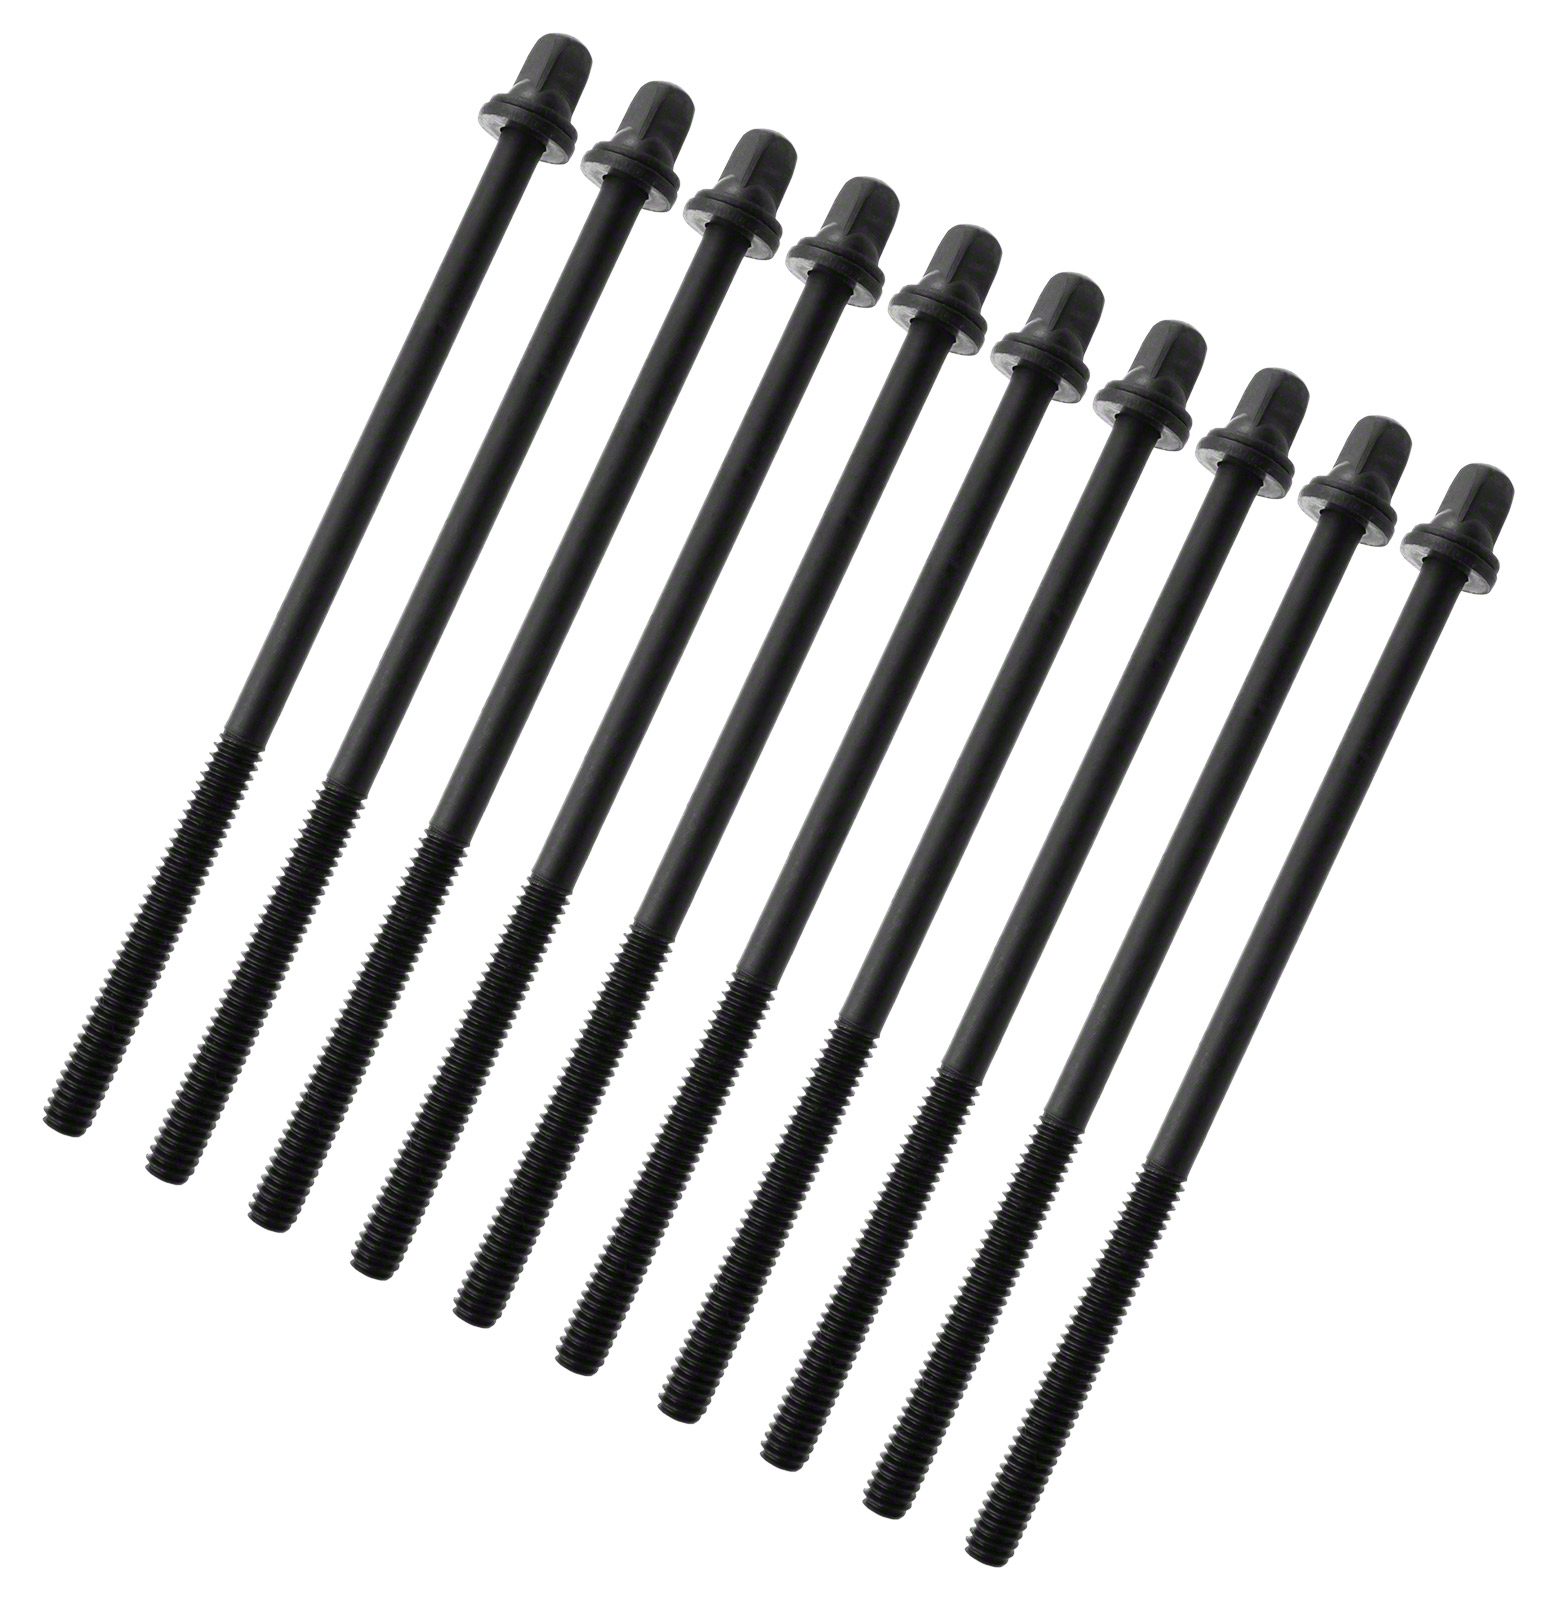 SPAREDRUM TRC-110W-BK - 110MM TENSION ROD BLACK WITH WASHER - 7/32